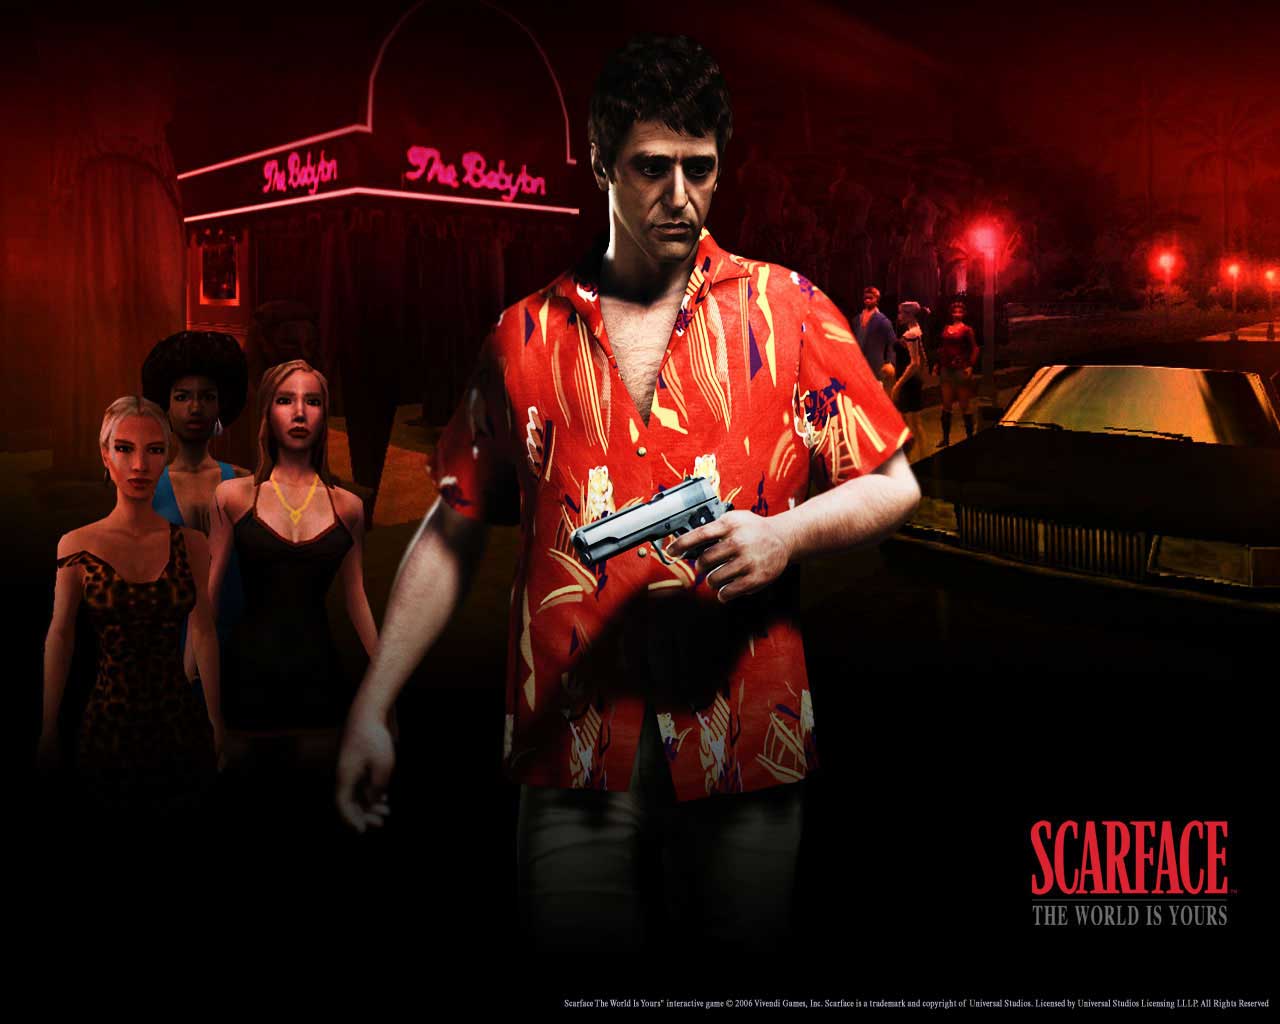 Scarface Wallpaper The World Is Yours - HD Wallpaper 